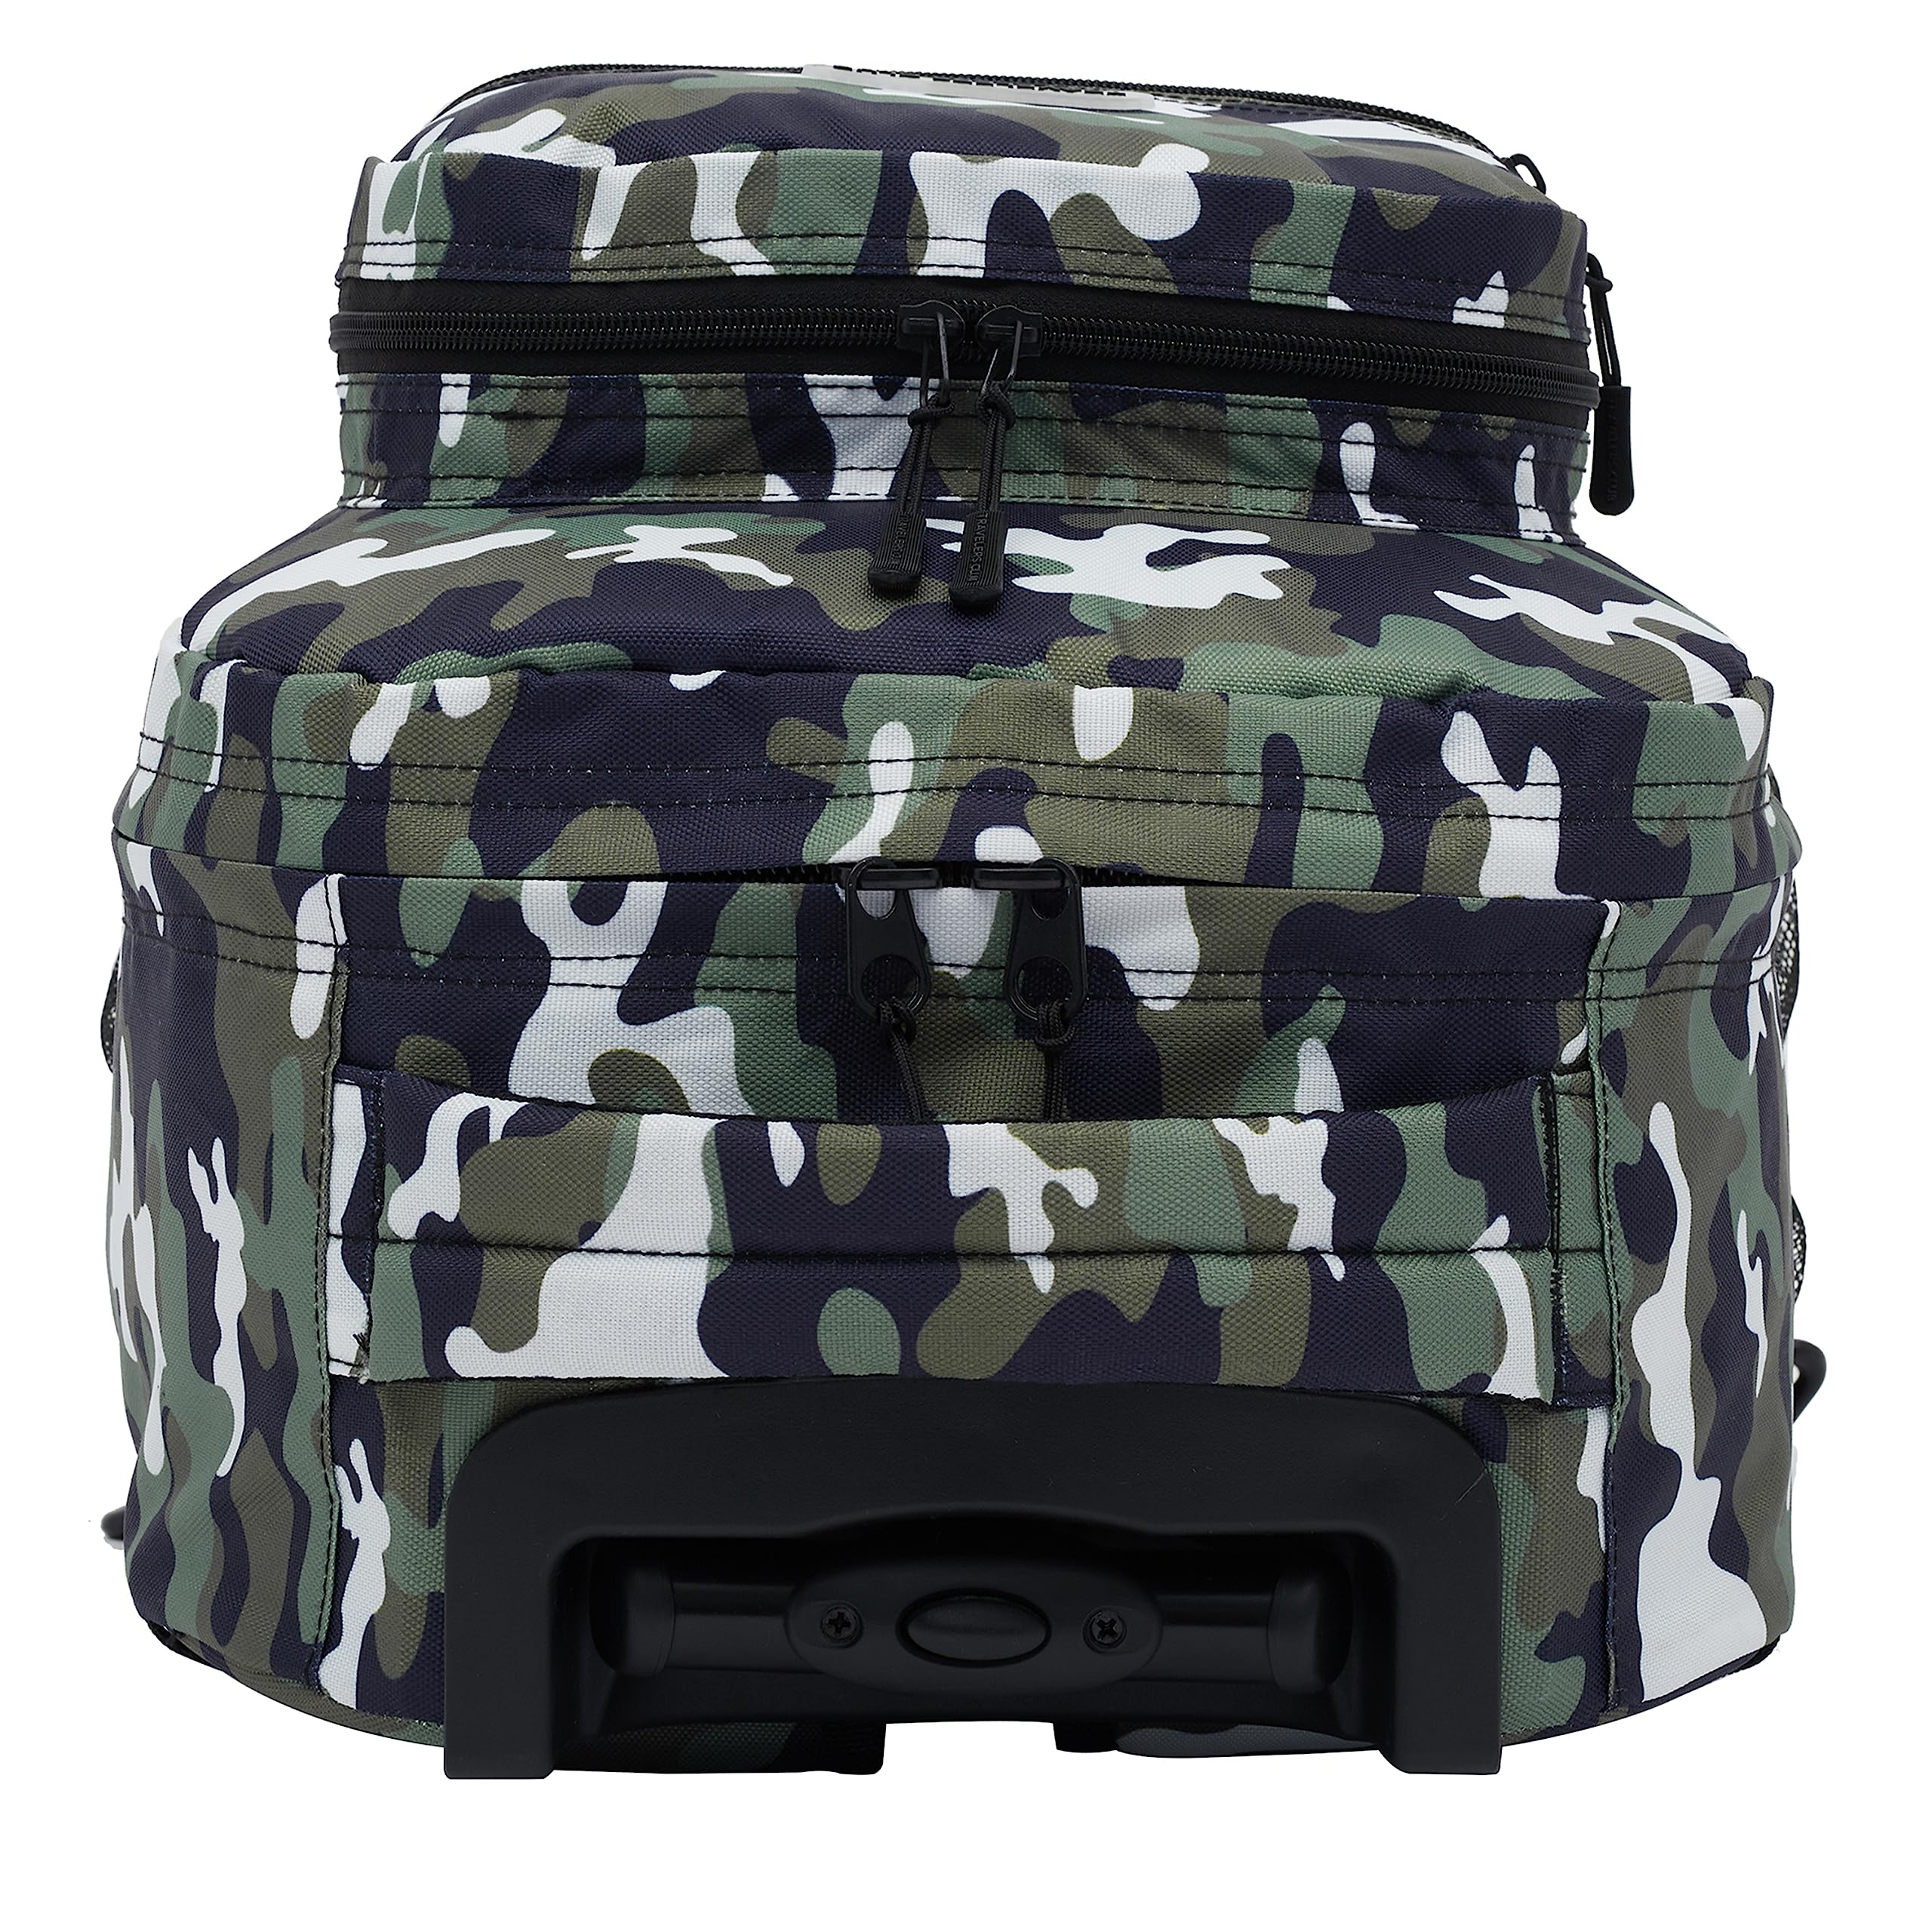 Travelers Club Rolling Backpack with Shoulder Straps, Camo, 18-Inch